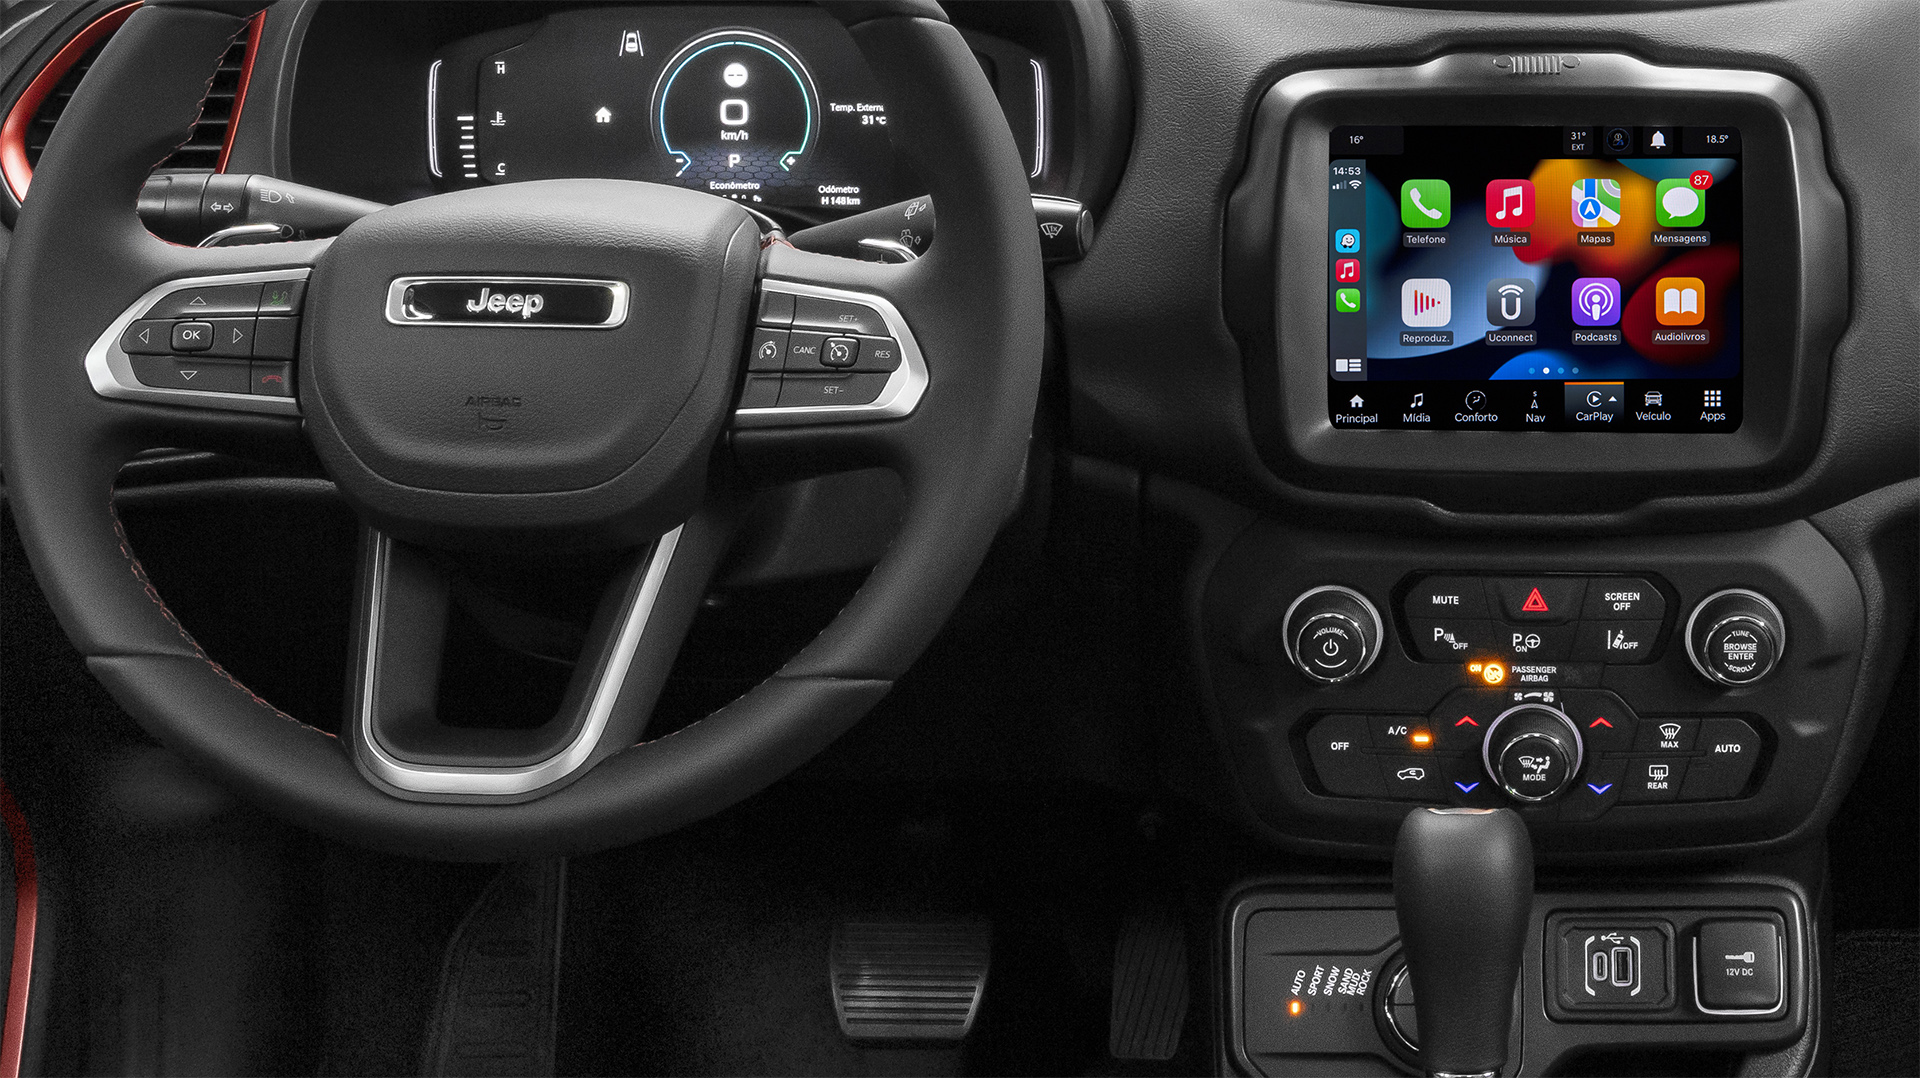 Fresh interior on the Trailhawk, including a steering wheel inherited from its older sister, the Jeep Compass